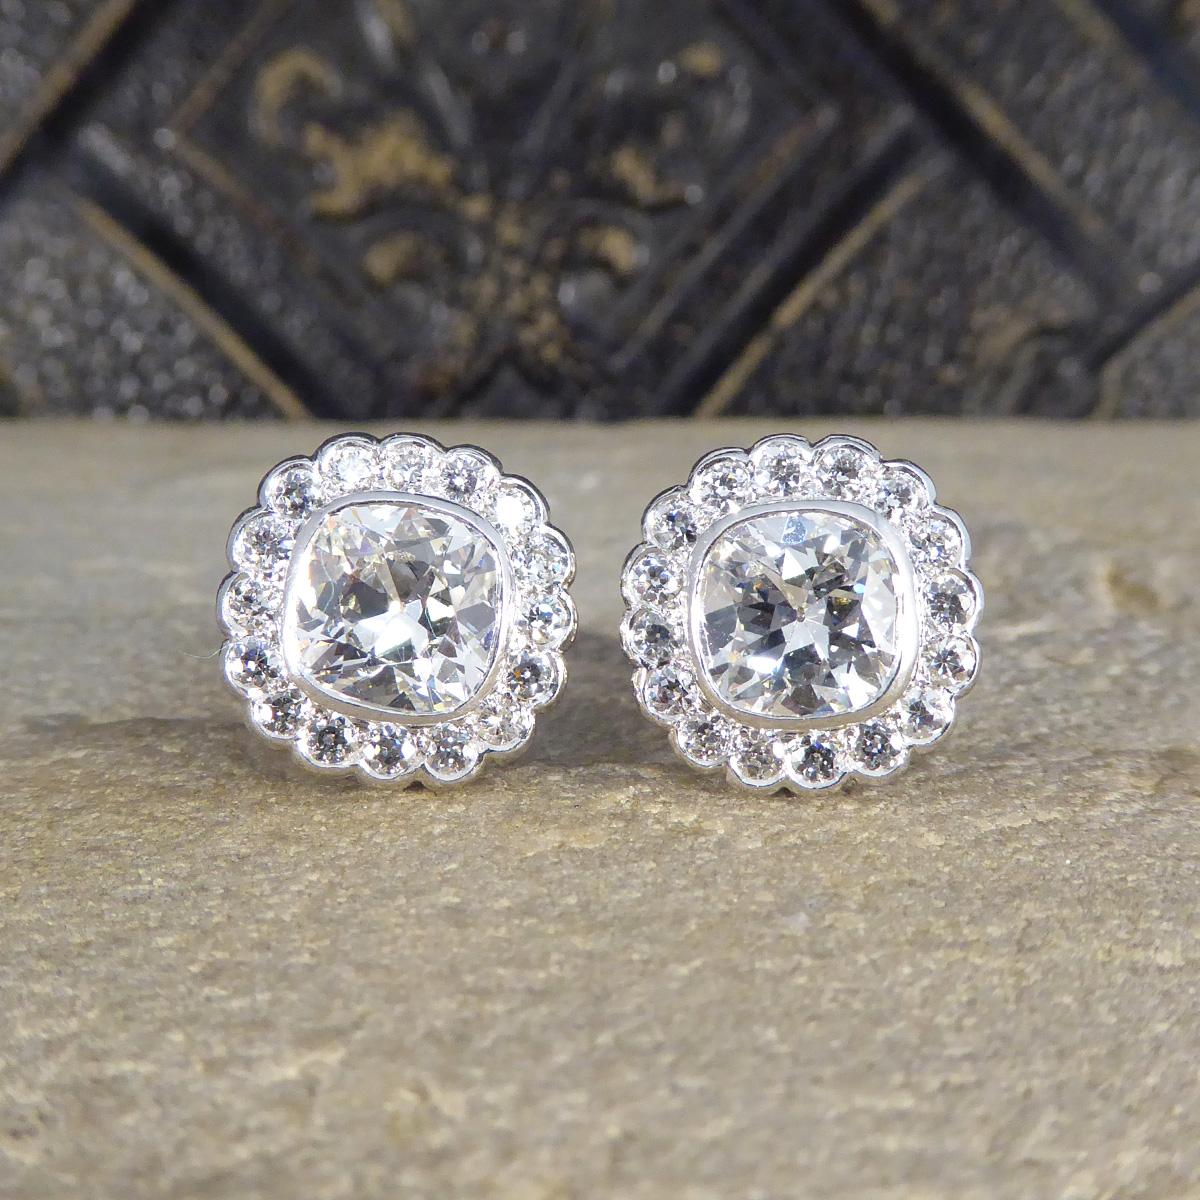 Emanate timeless elegance with these exquisite 1940's Old Cushion Cut Daisy Cluster Stud Earrings, masterfully crafted in luxurious platinum. At the heart of each stud lies a captivating approximately 2.00ct cushion cut diamond, boasting an